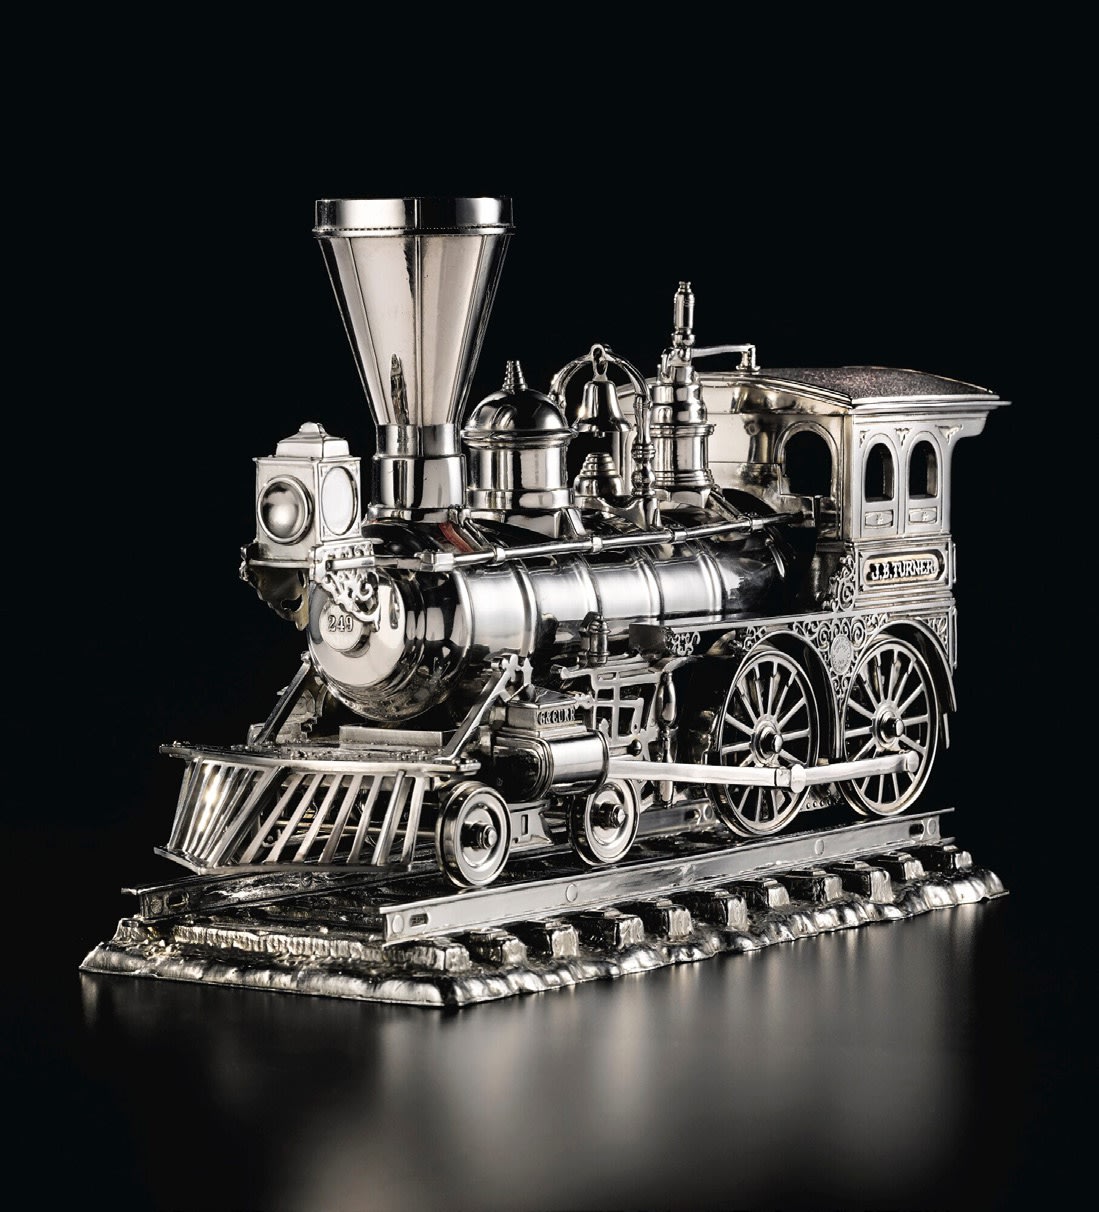 Jeff Koons Jim Beam - J.B. Turner Engine 1986 stainless steel, bourbon 11 x 17 1/8 x 6 1/2 inches 27.9 x 43.2 x 16.5 cm Edition 1 of 3, with 1 AP